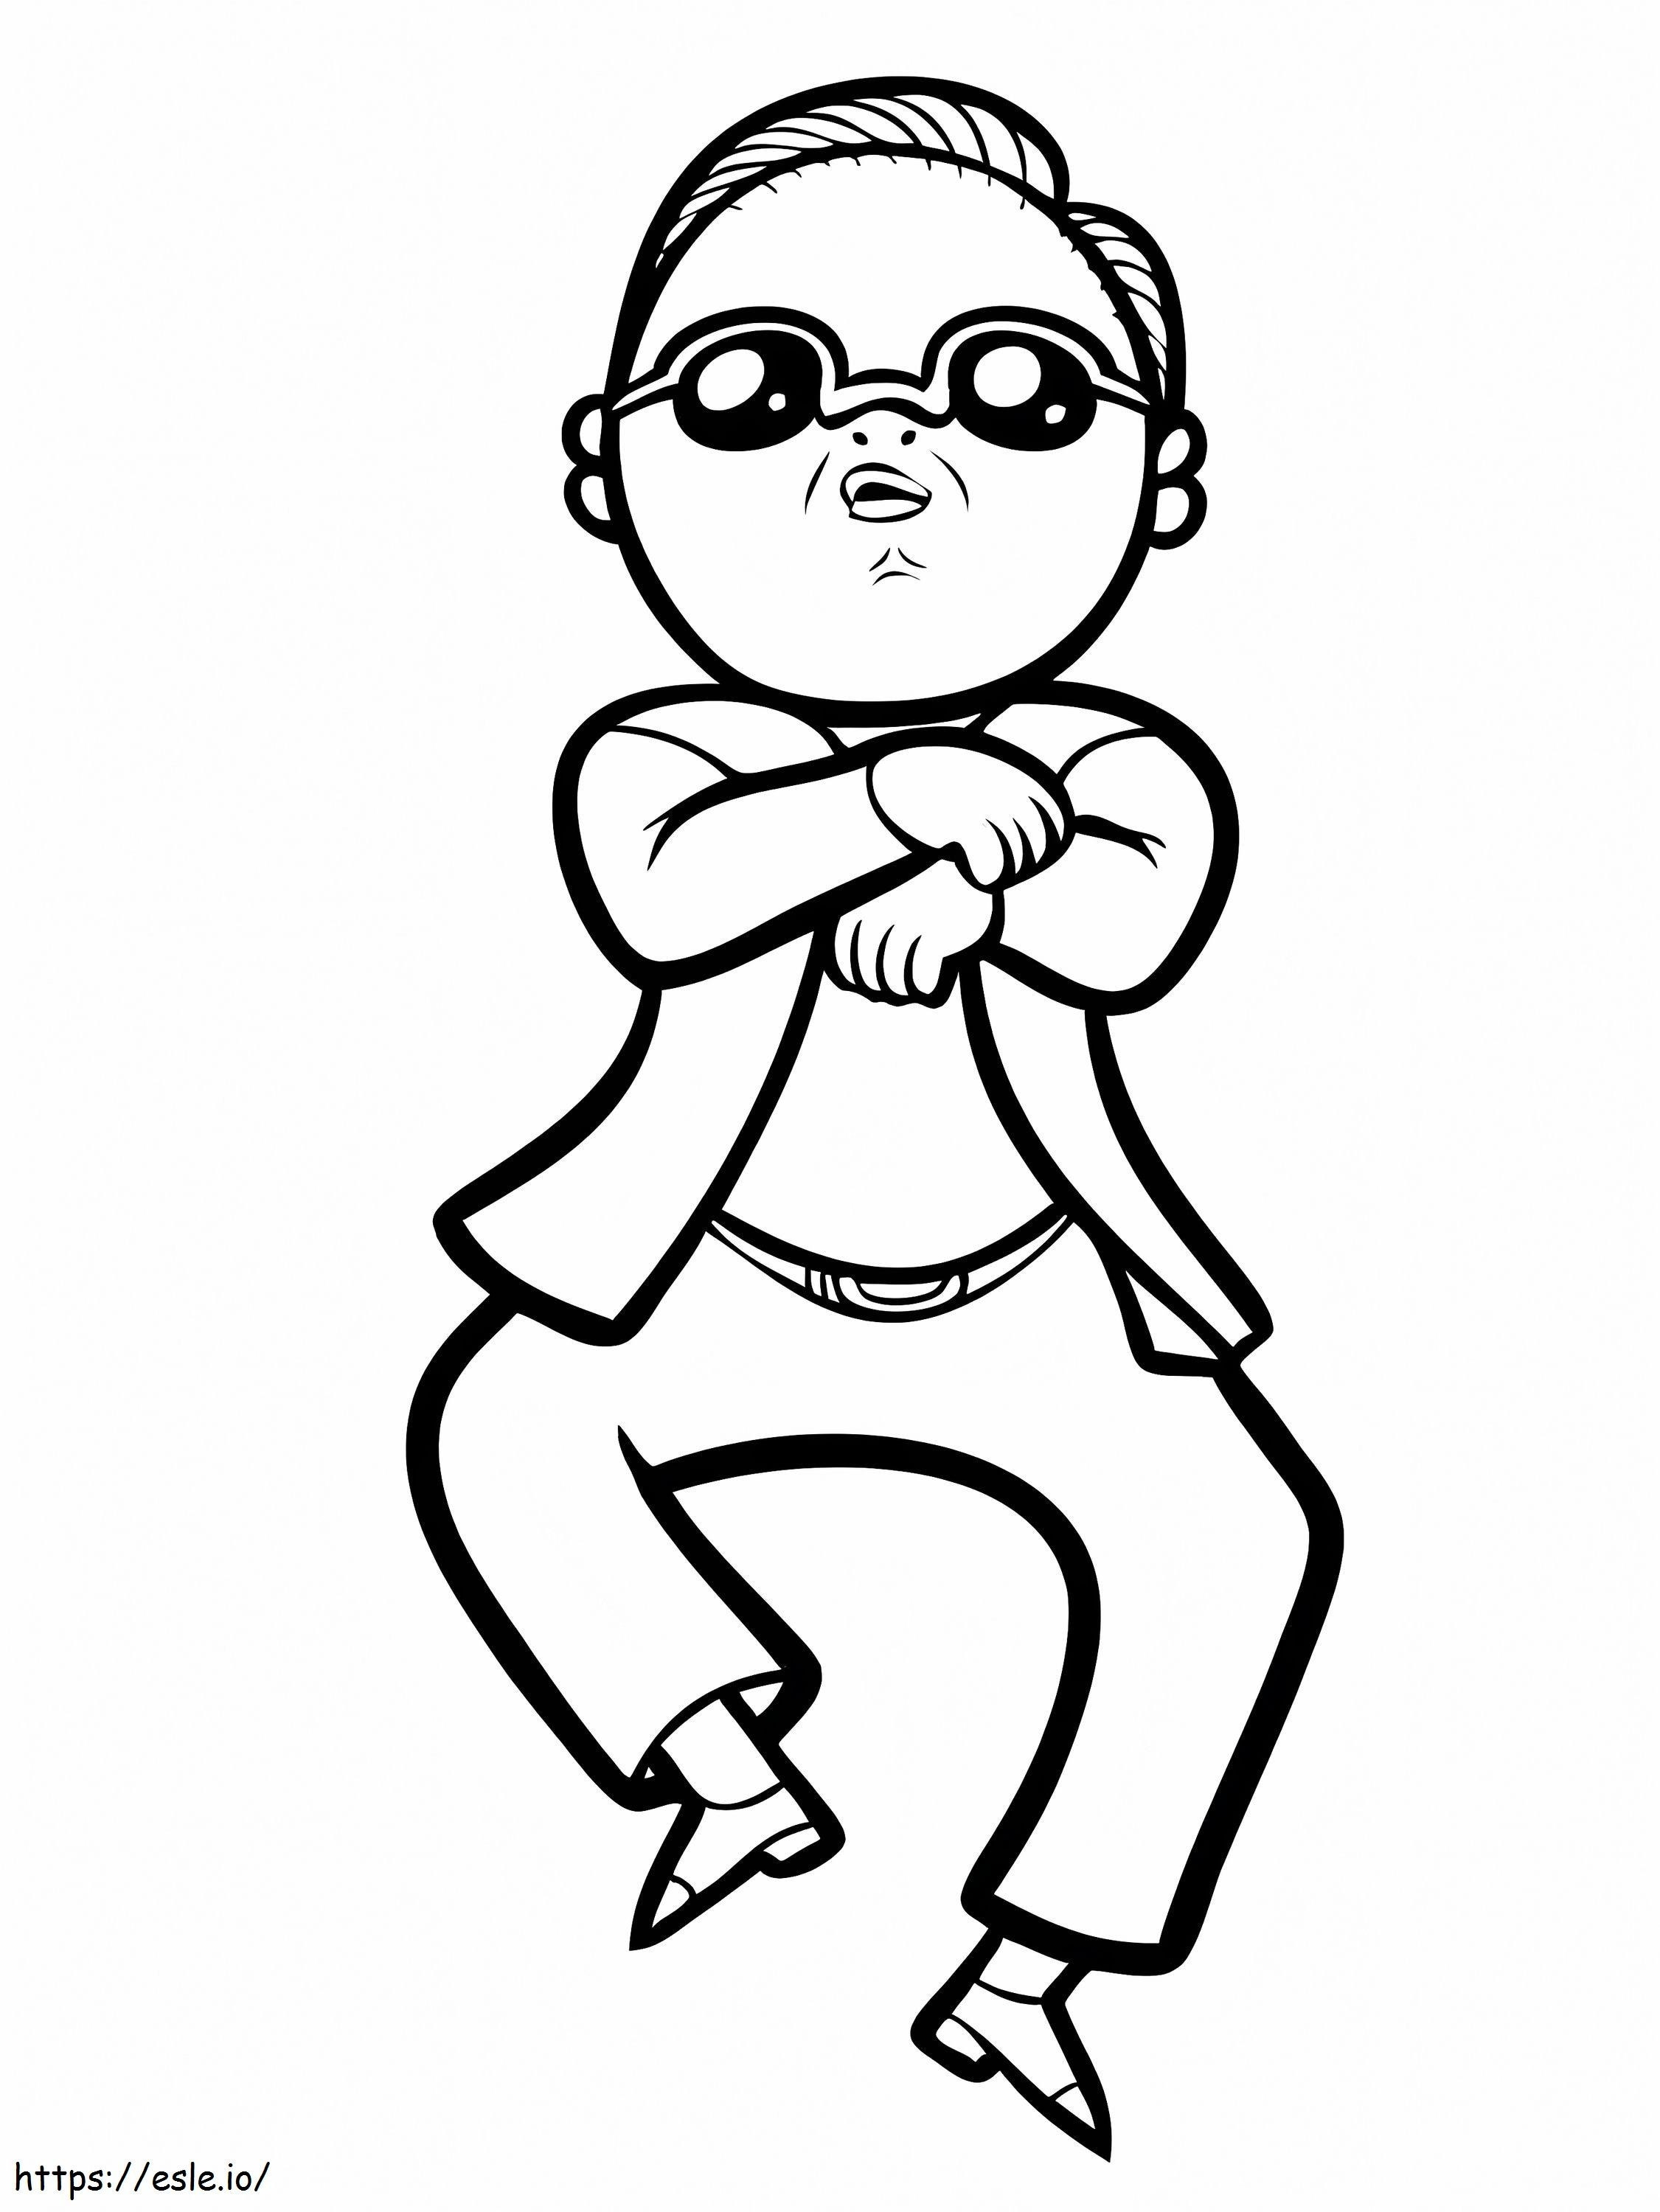 Psy Gangnam Style coloring page